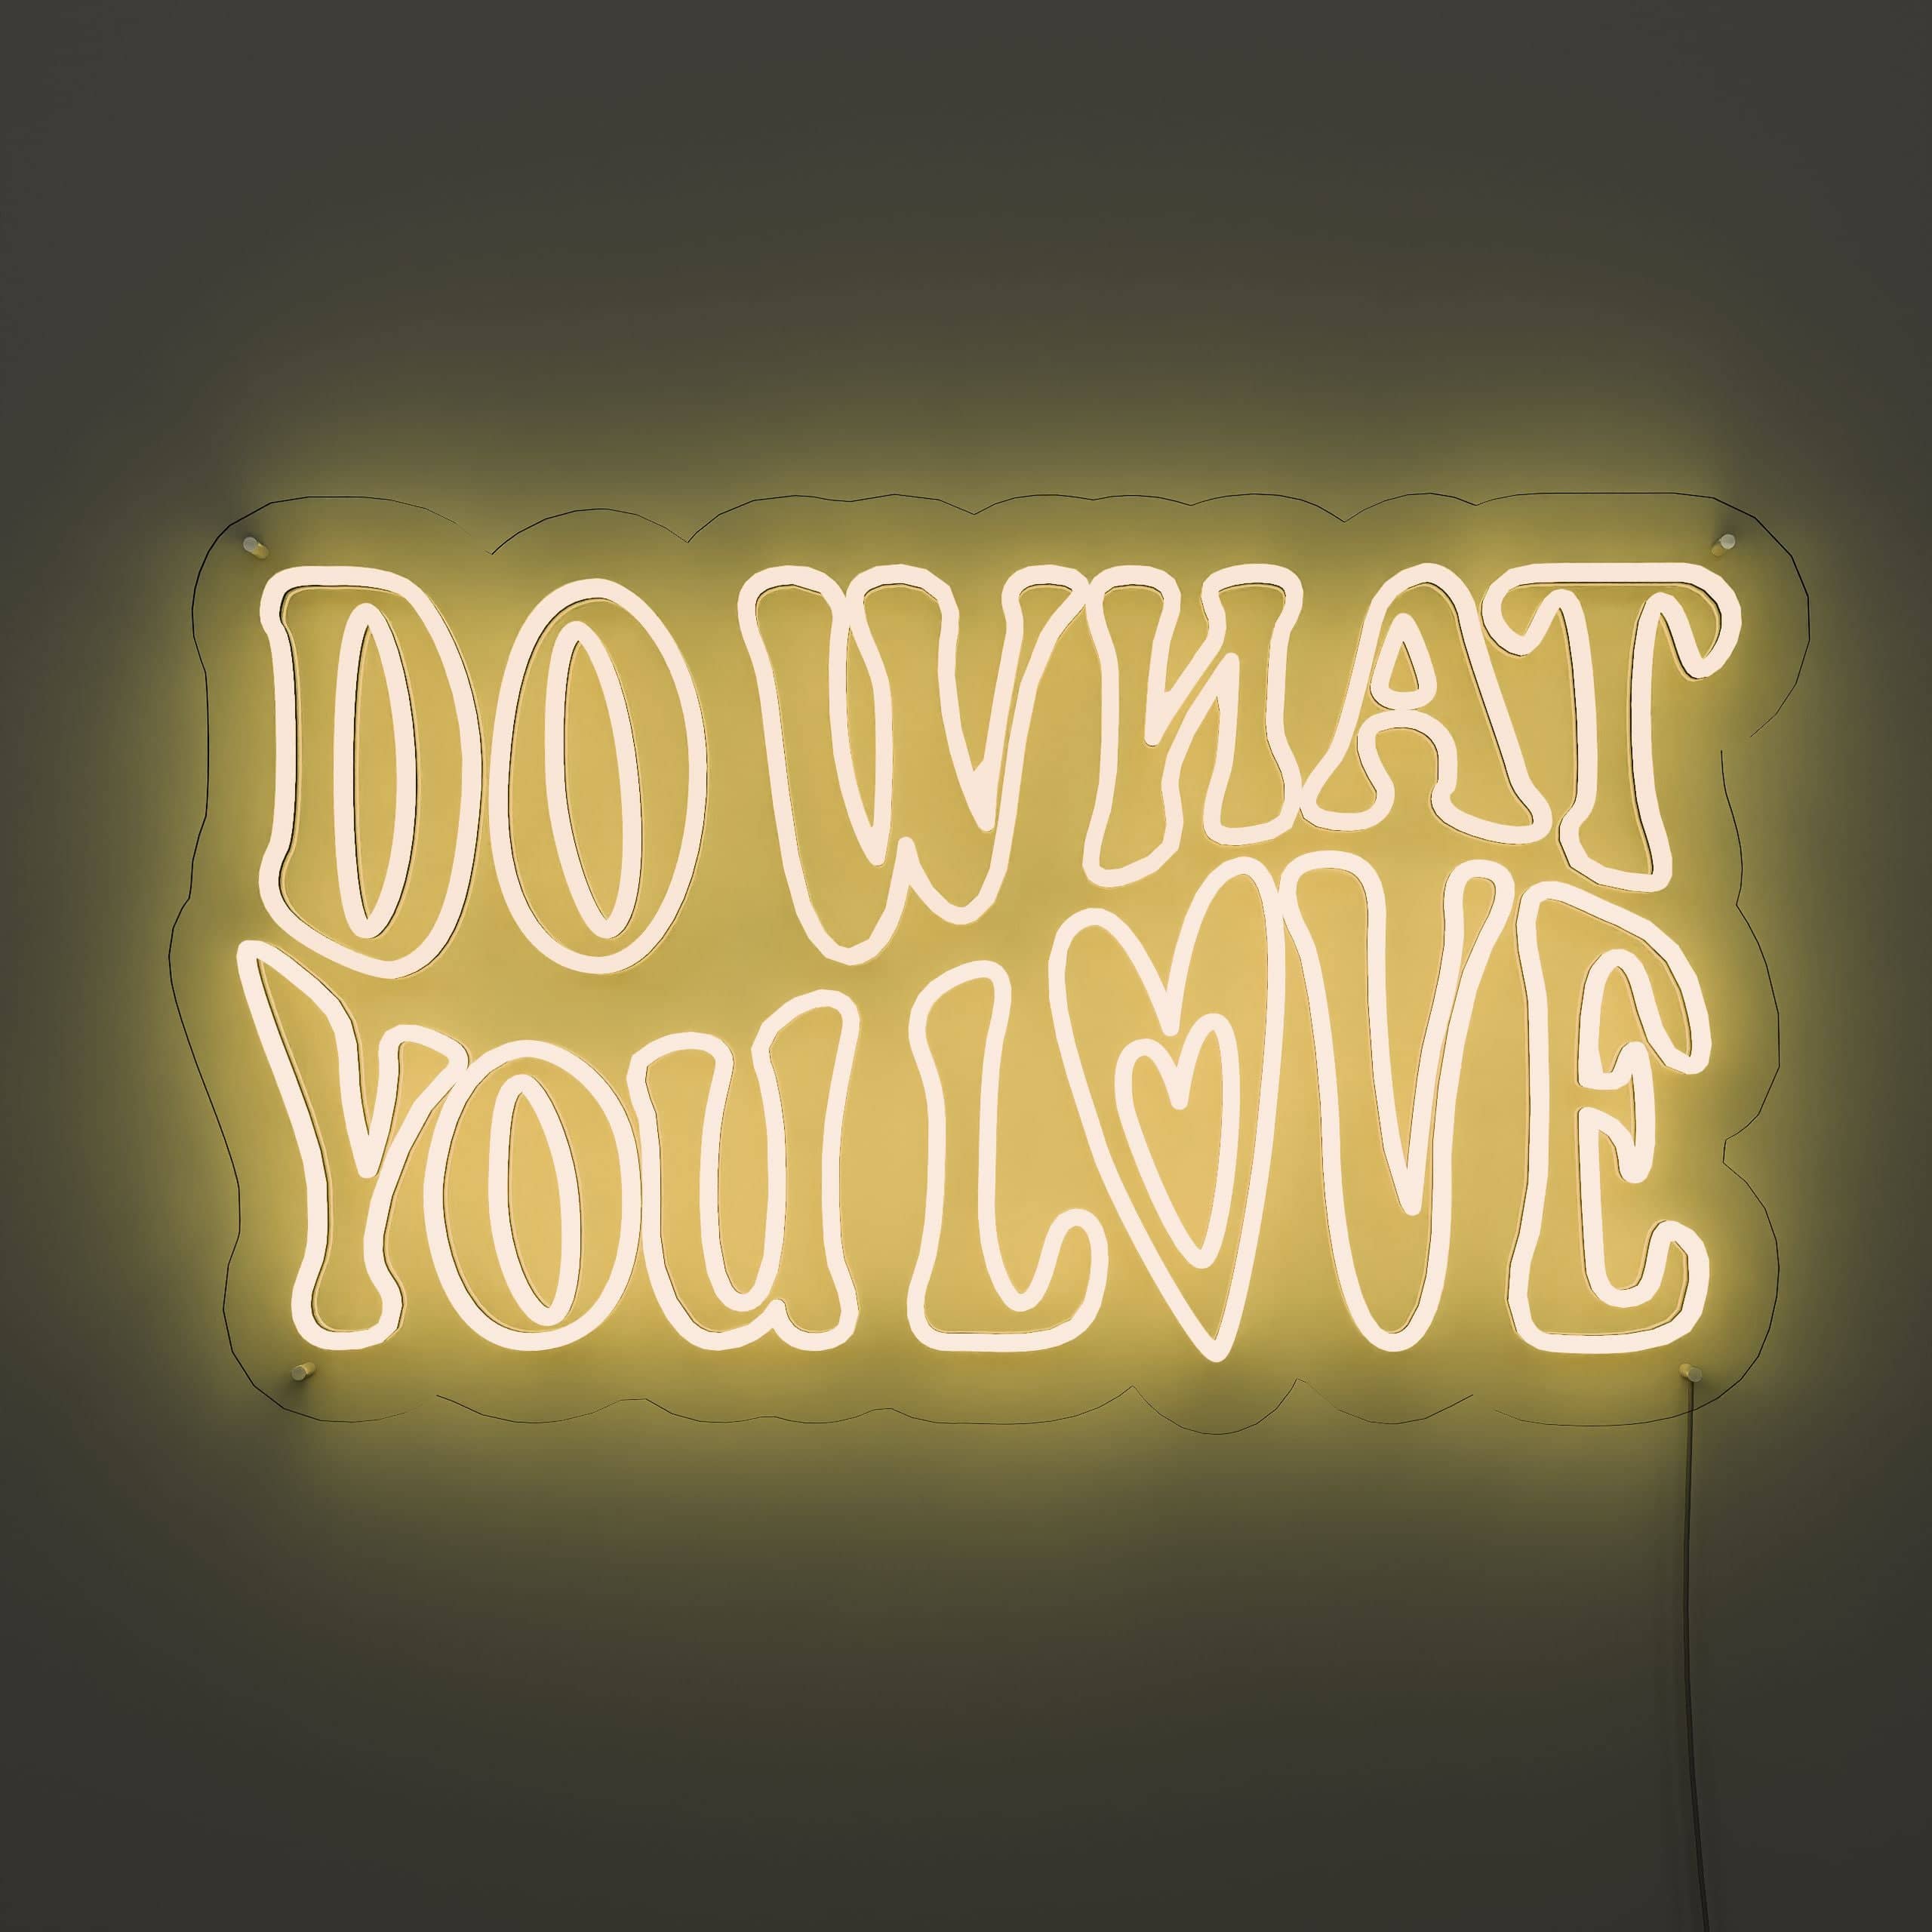 explore-your-affections-neon-sign-lite